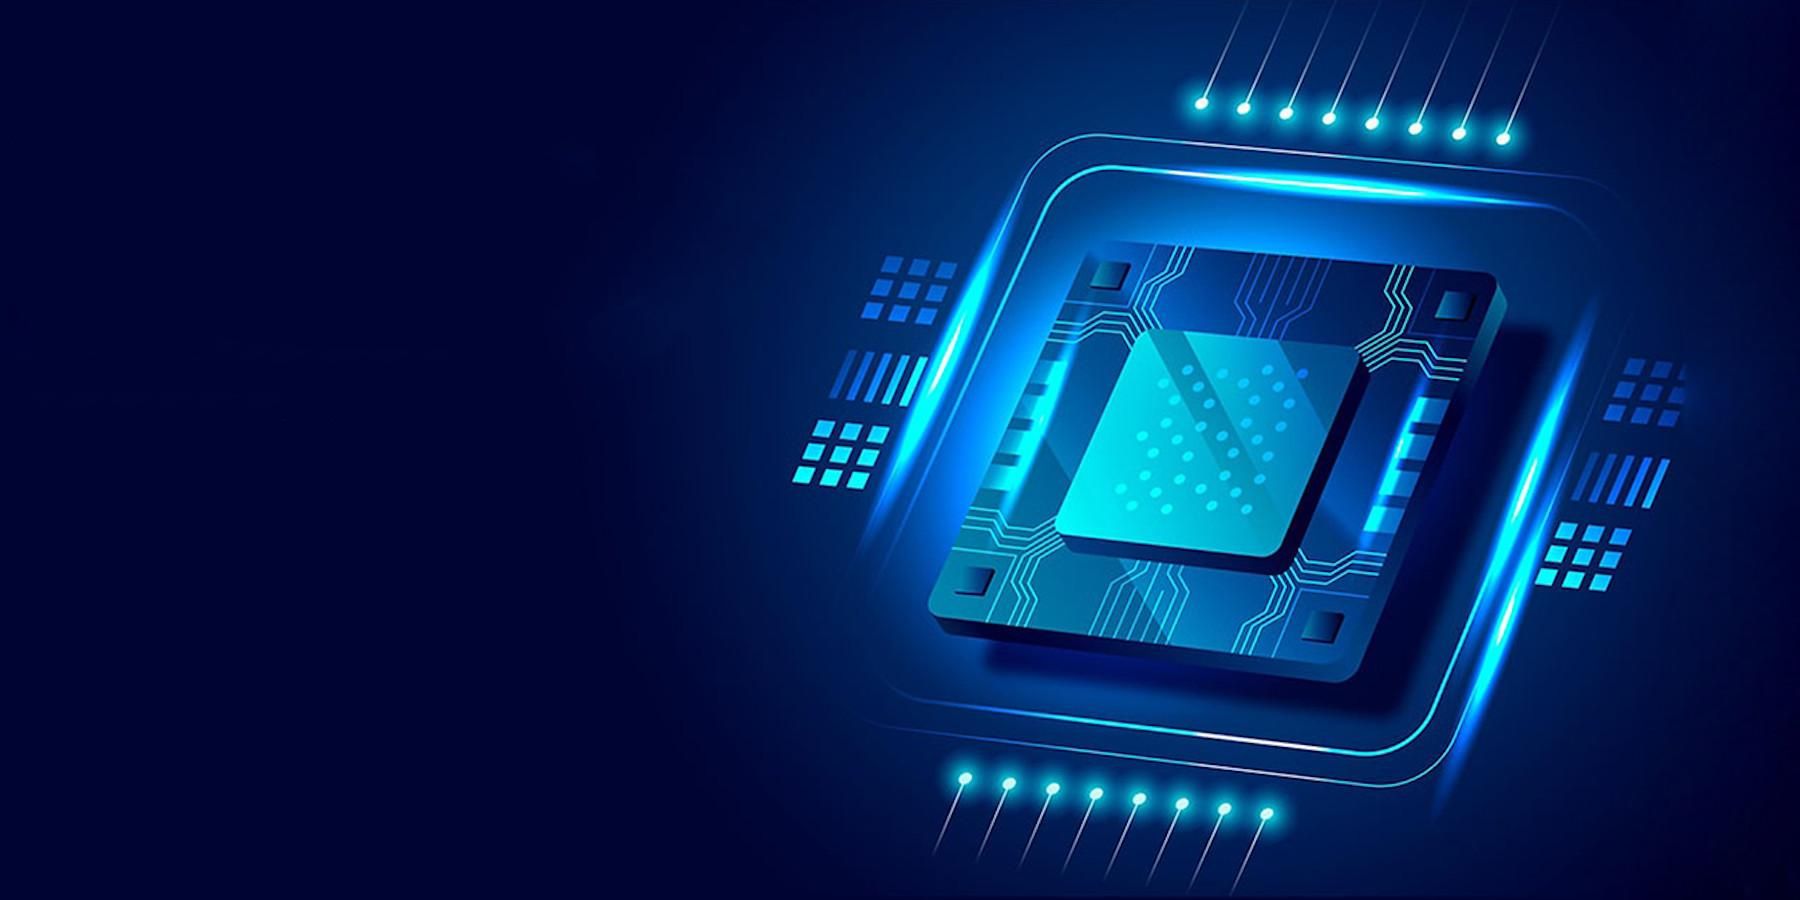 Vectorial design of a chip over a blue background